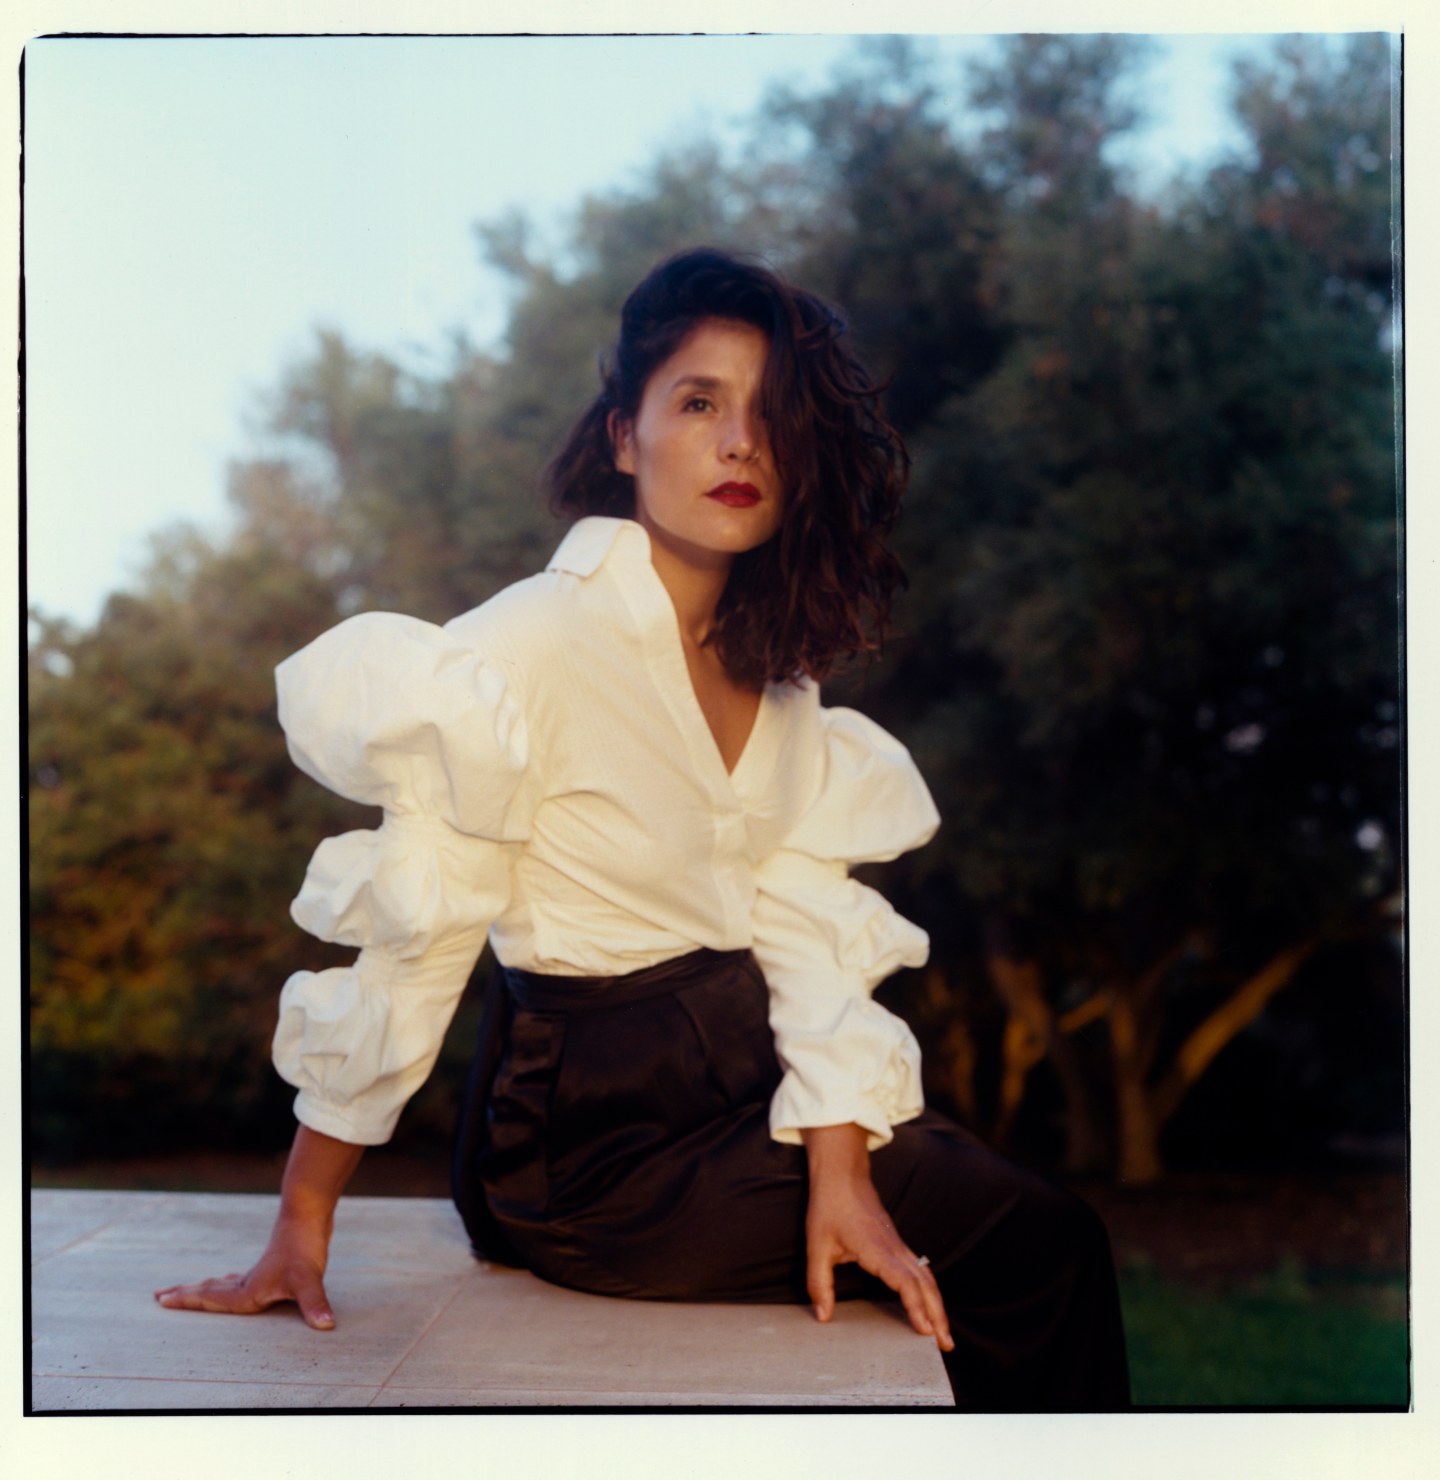 Jessie Ware Is Coming Back Strong